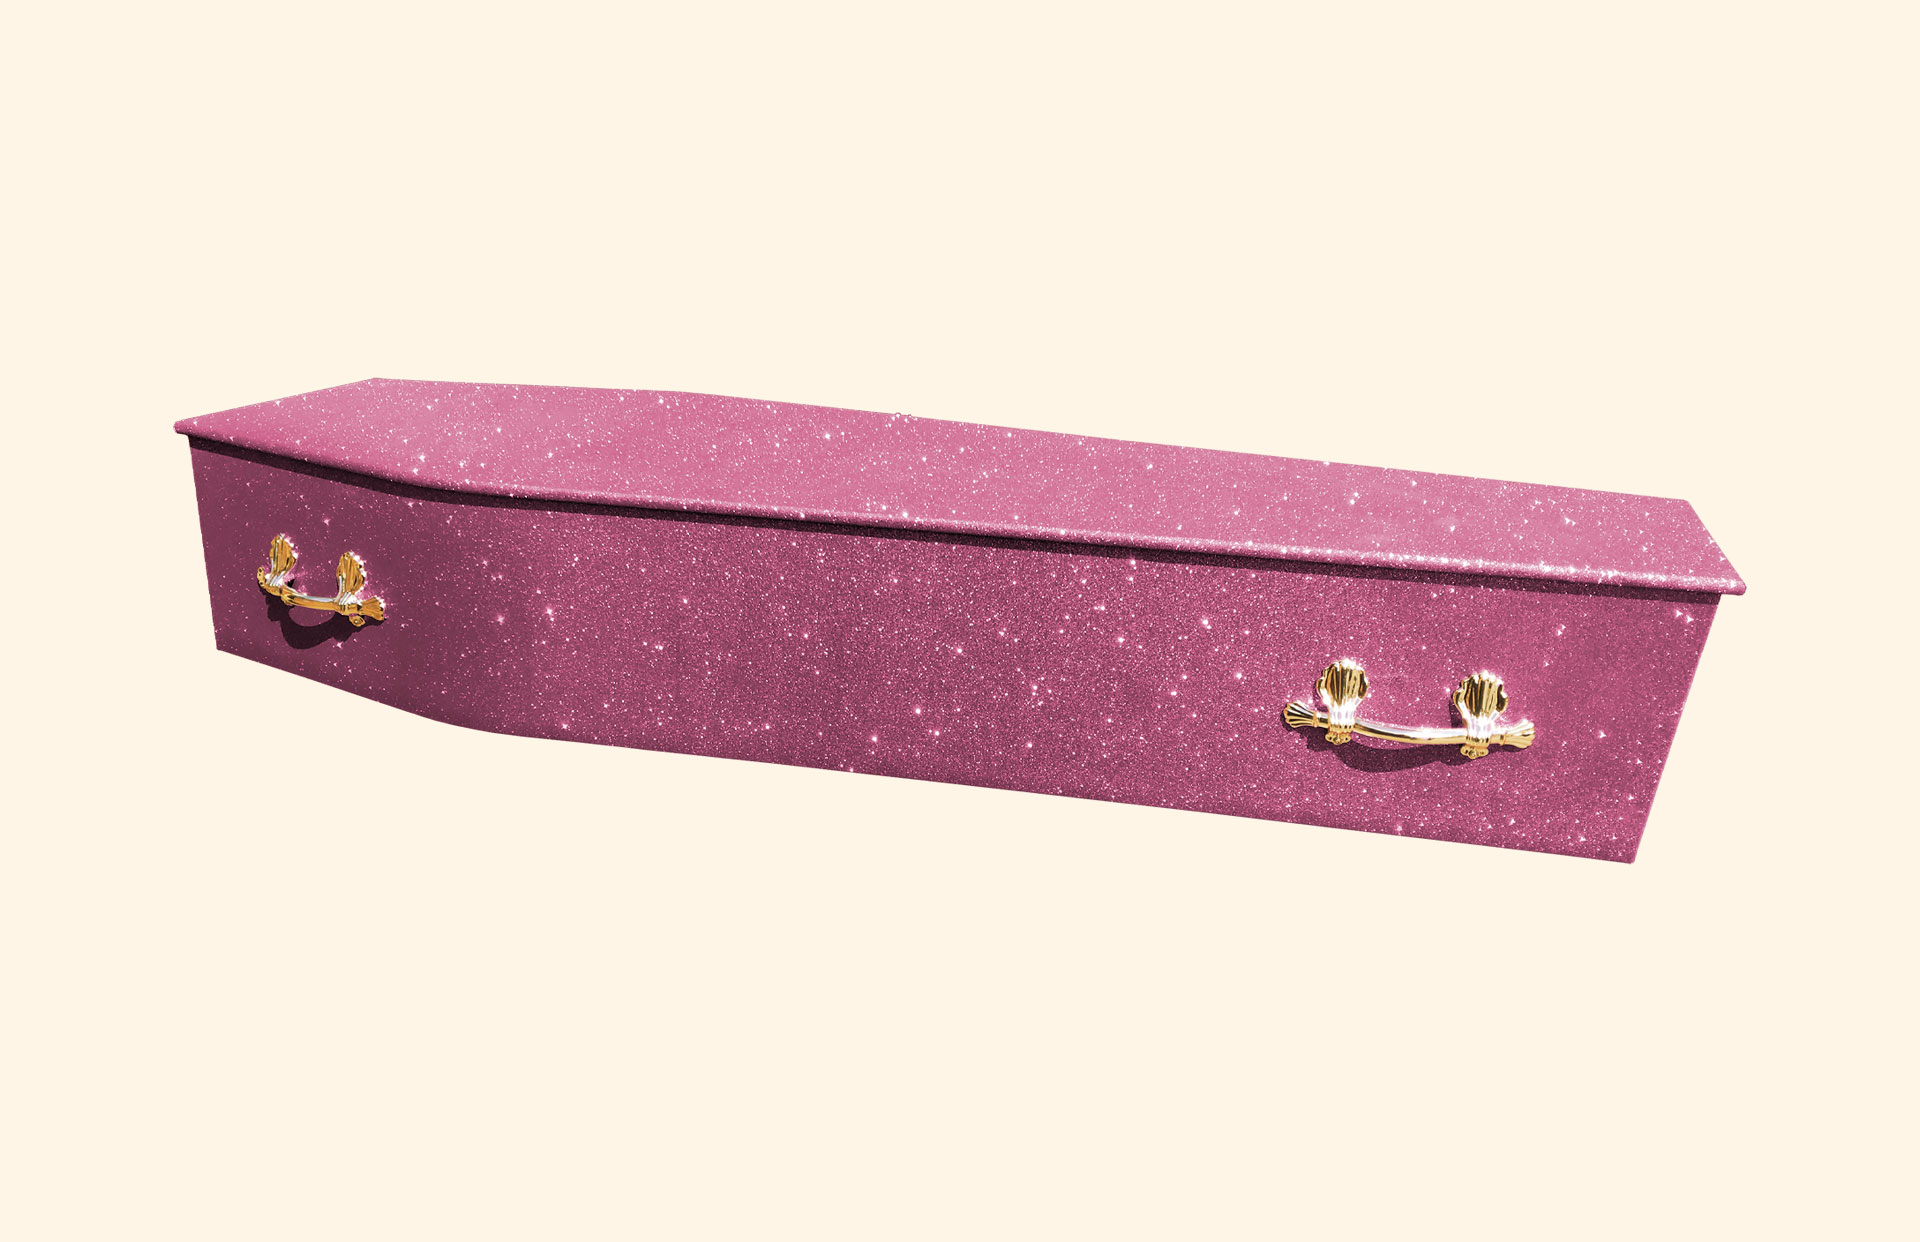 Rose Pink Glitter over a traditional coffin